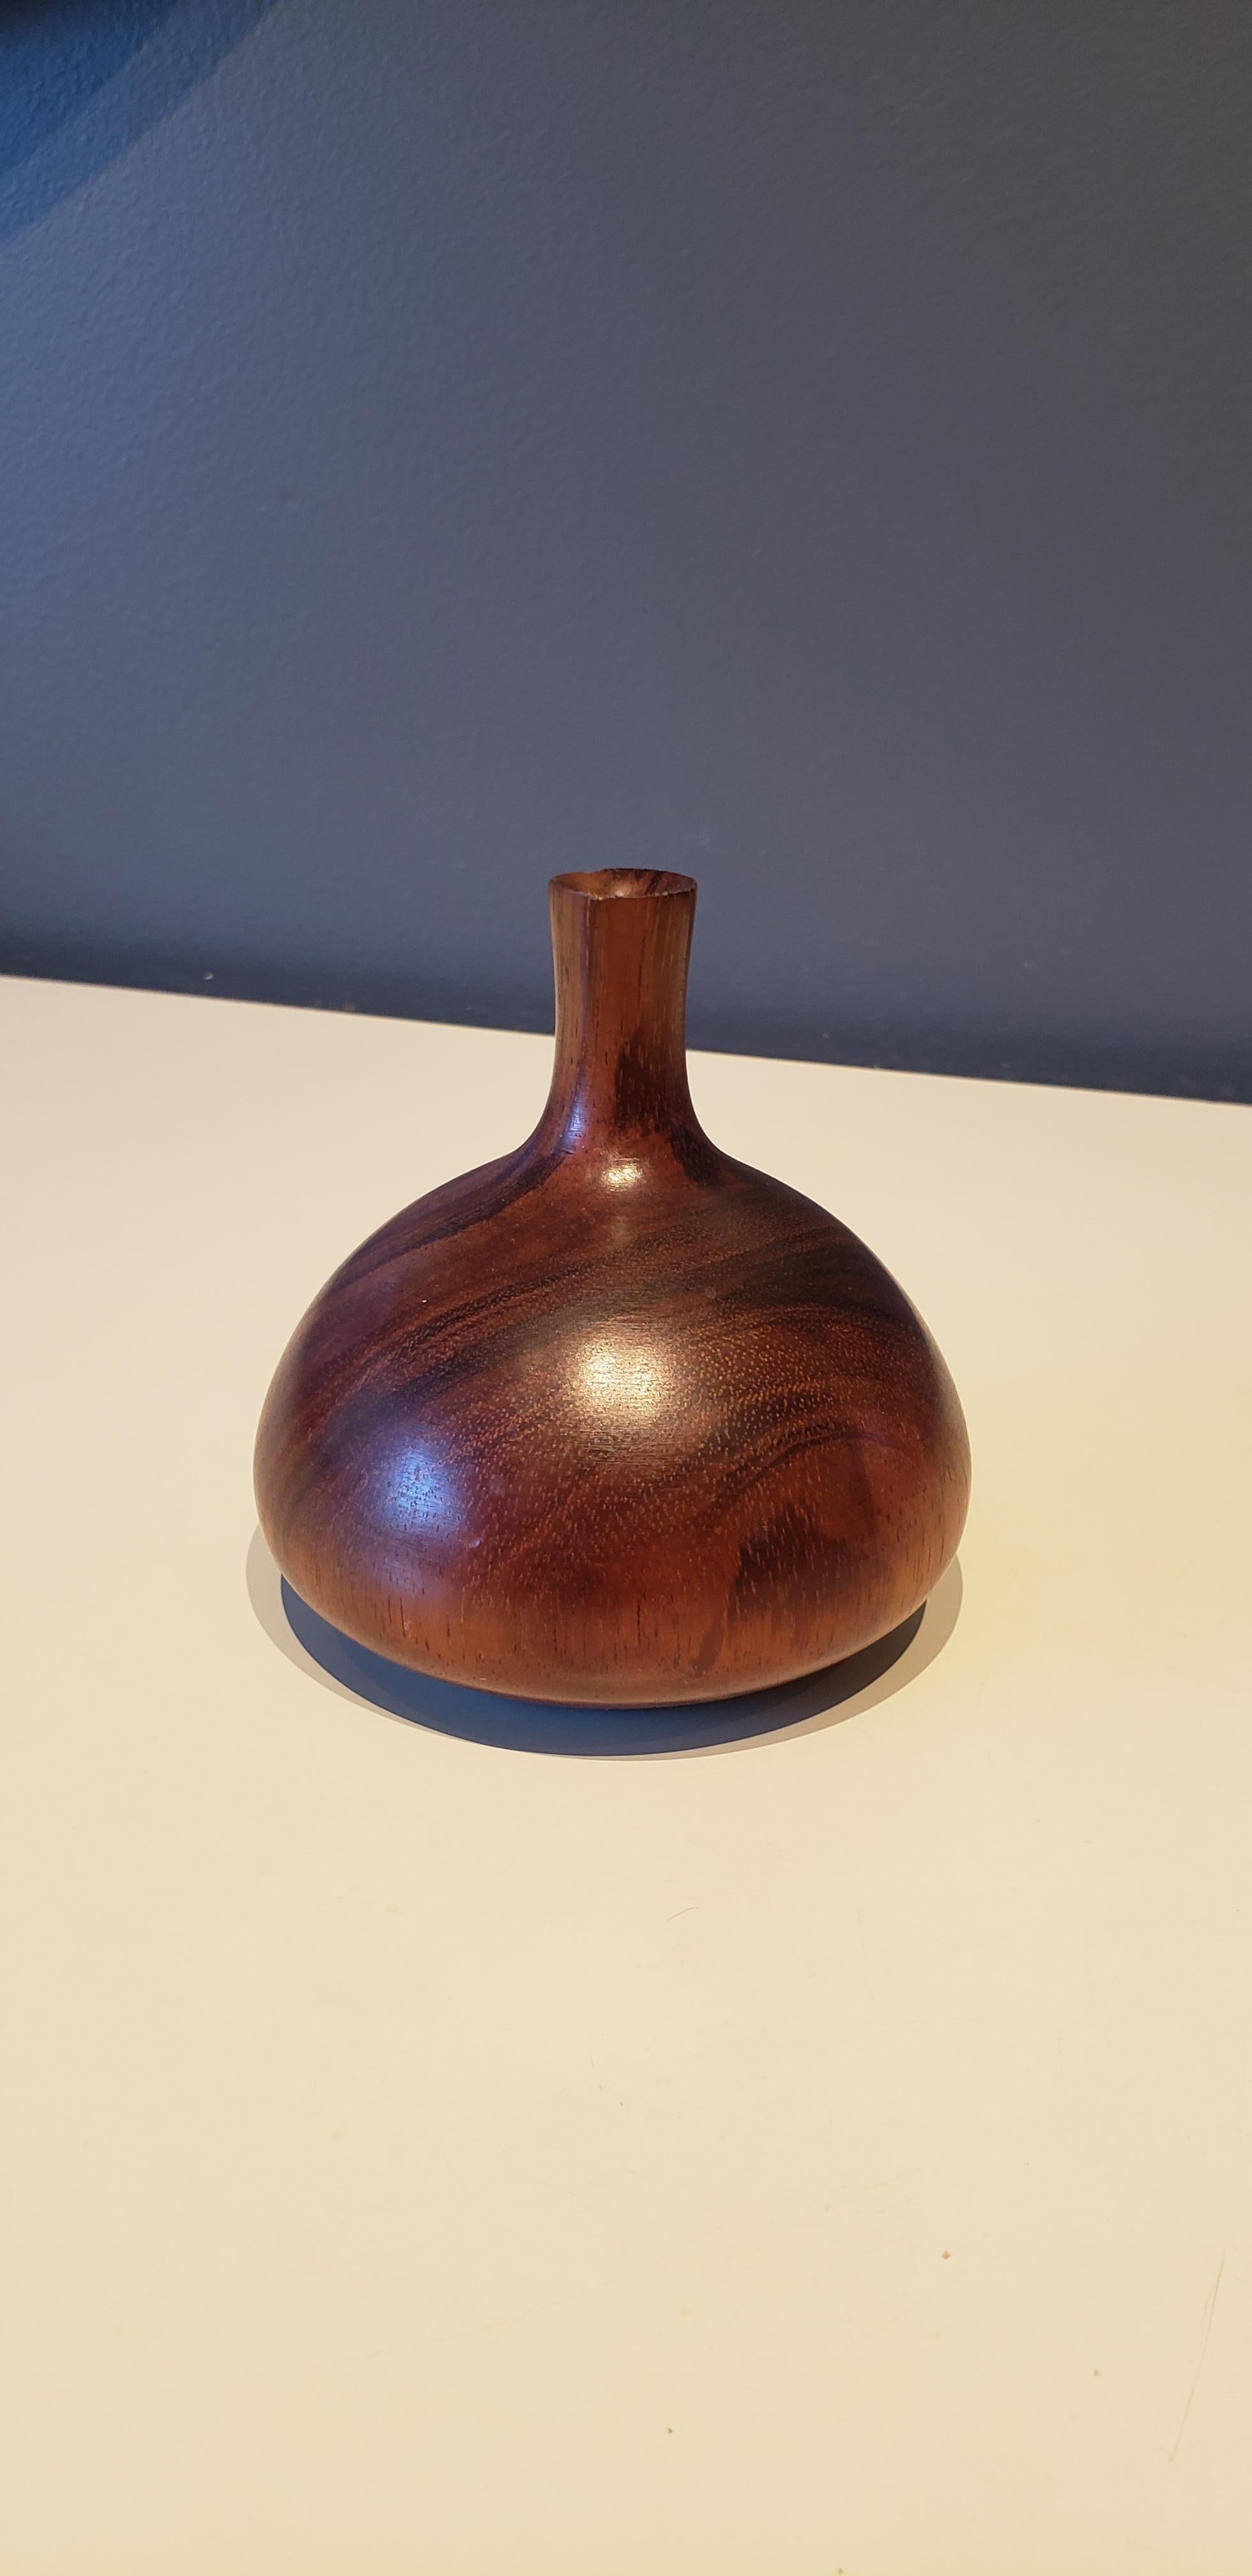 Lovely hand-turned wood vase by master craftsman Rude Osolnik, Kentucky. Handsome grain pattern. Felt has been replaced at some point and the piece is missing its characteristic pen signature. I have been collecting and selling Osolnik's work since